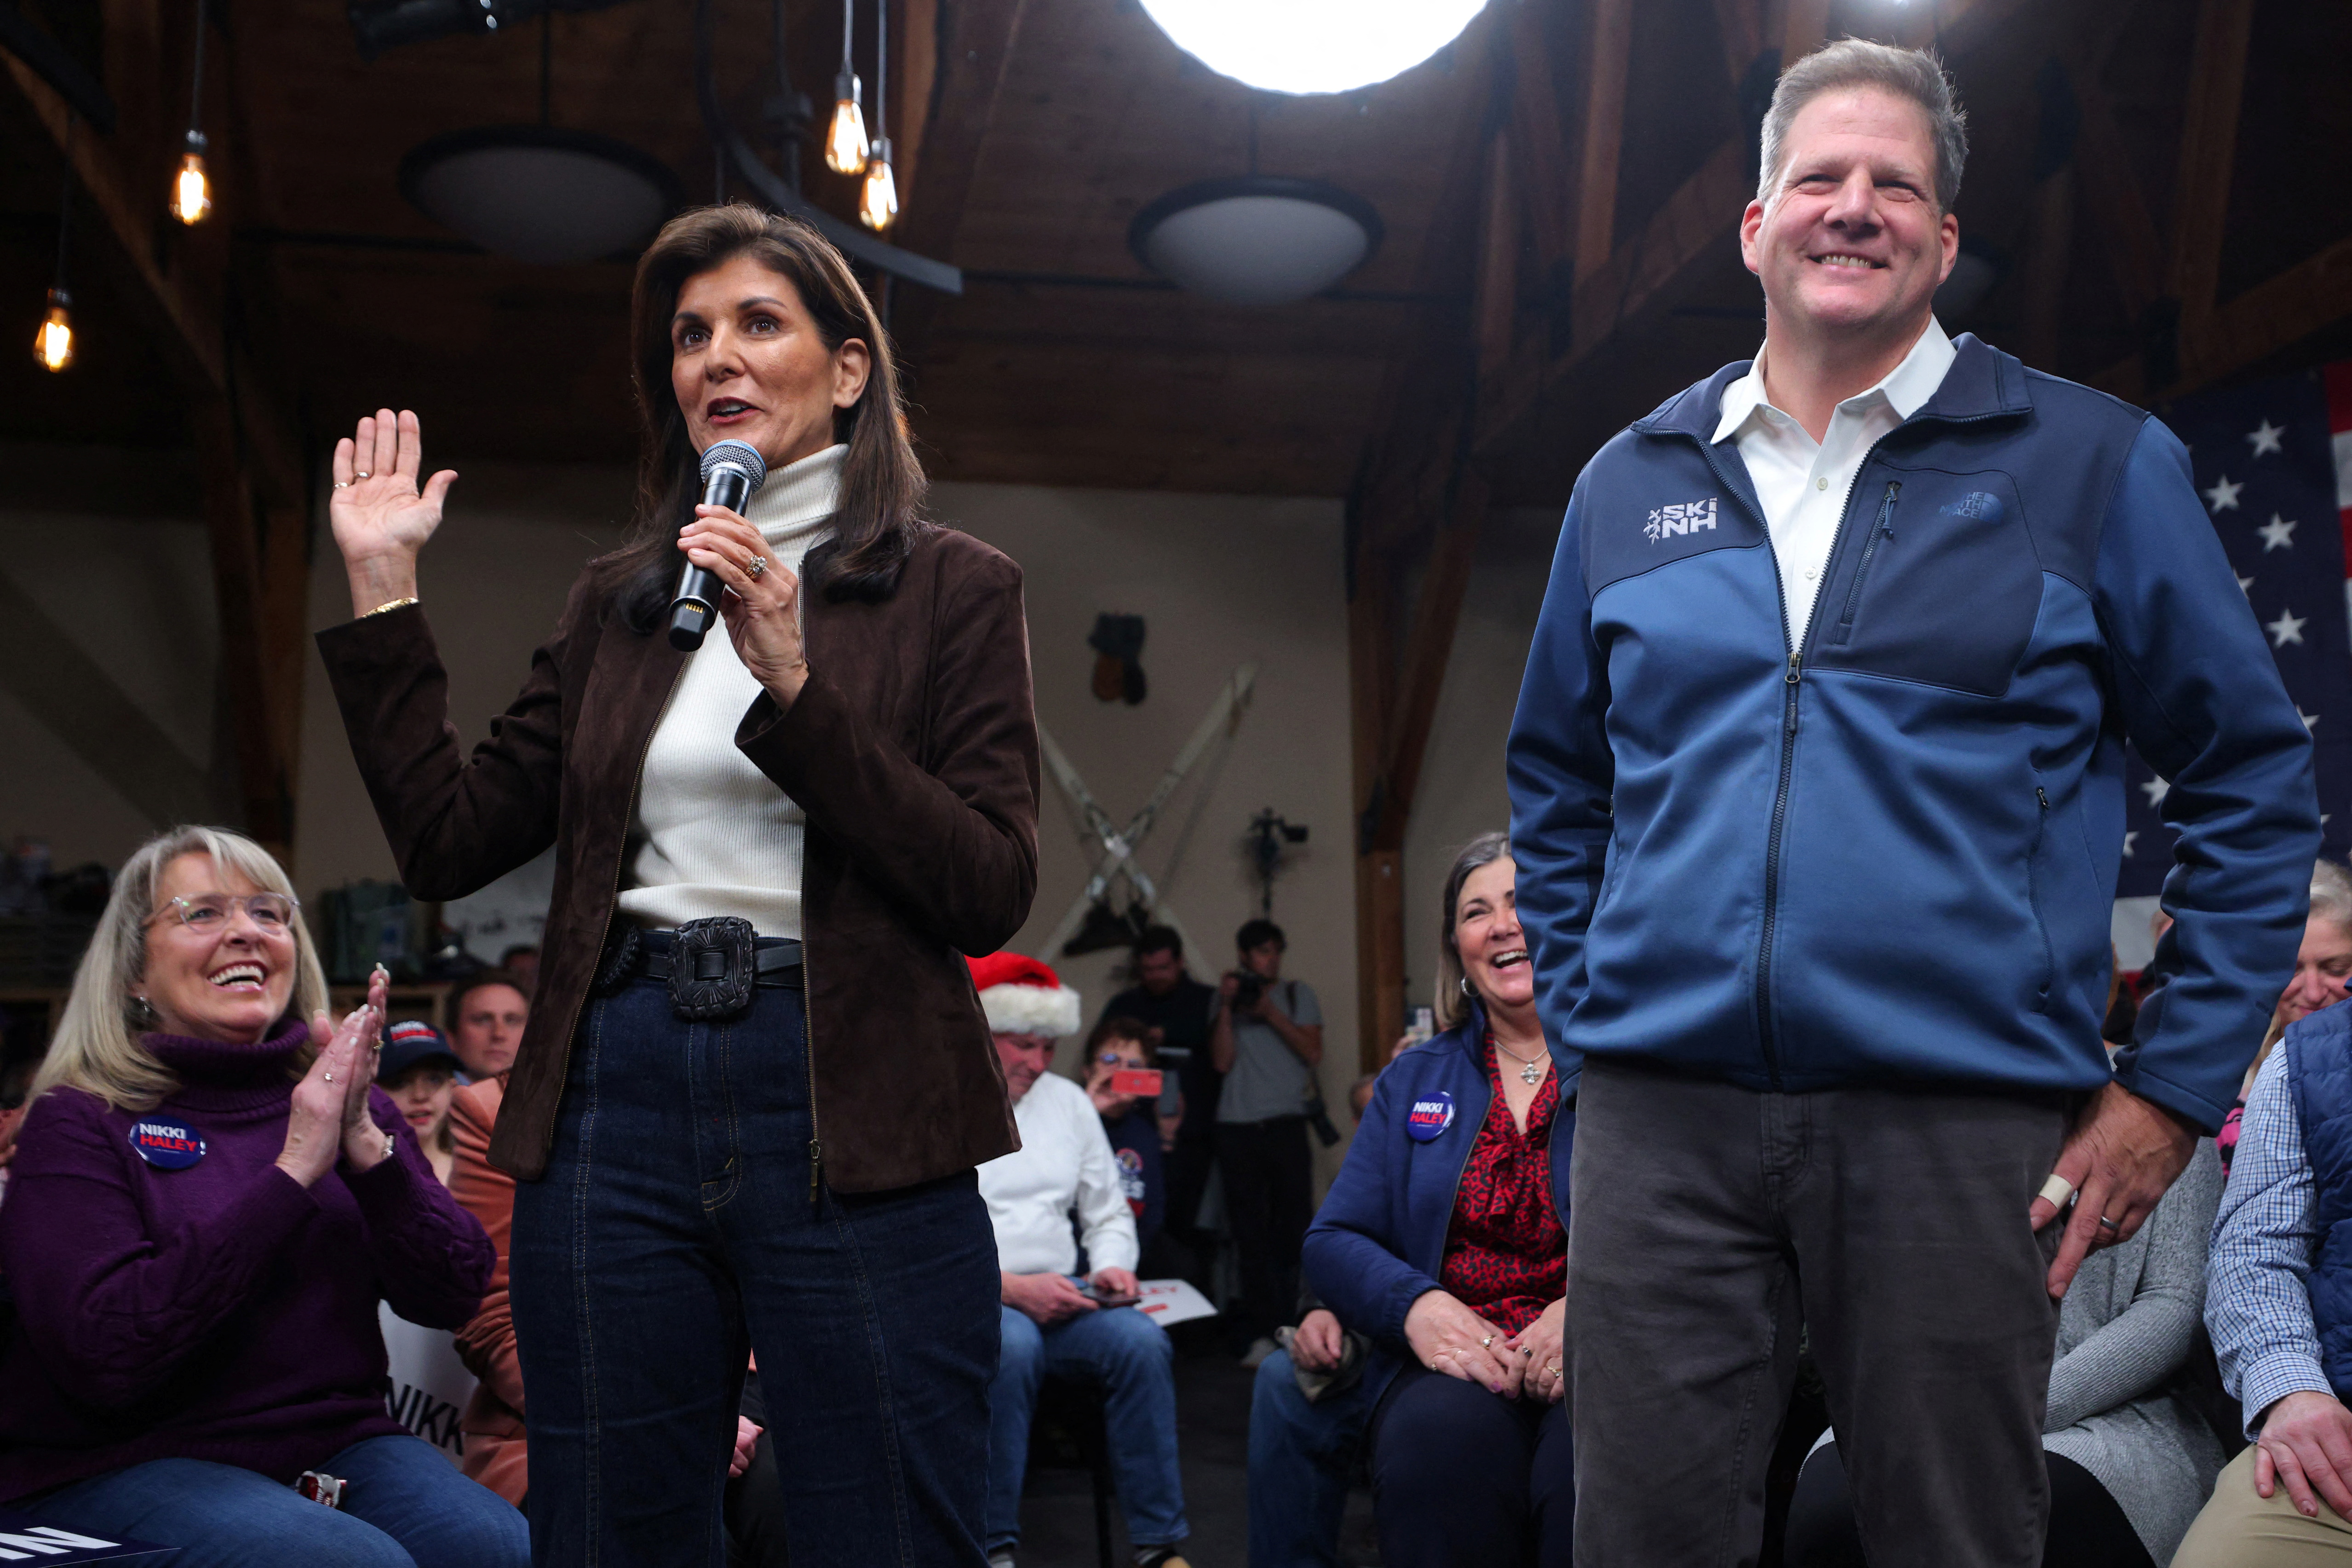 Former South Carolina Gov. Nikki Haley is endorsed by New Hampshire Gov. Chris Sununu at a campaign town hall in Manchester, New Hampshire, on December 12.